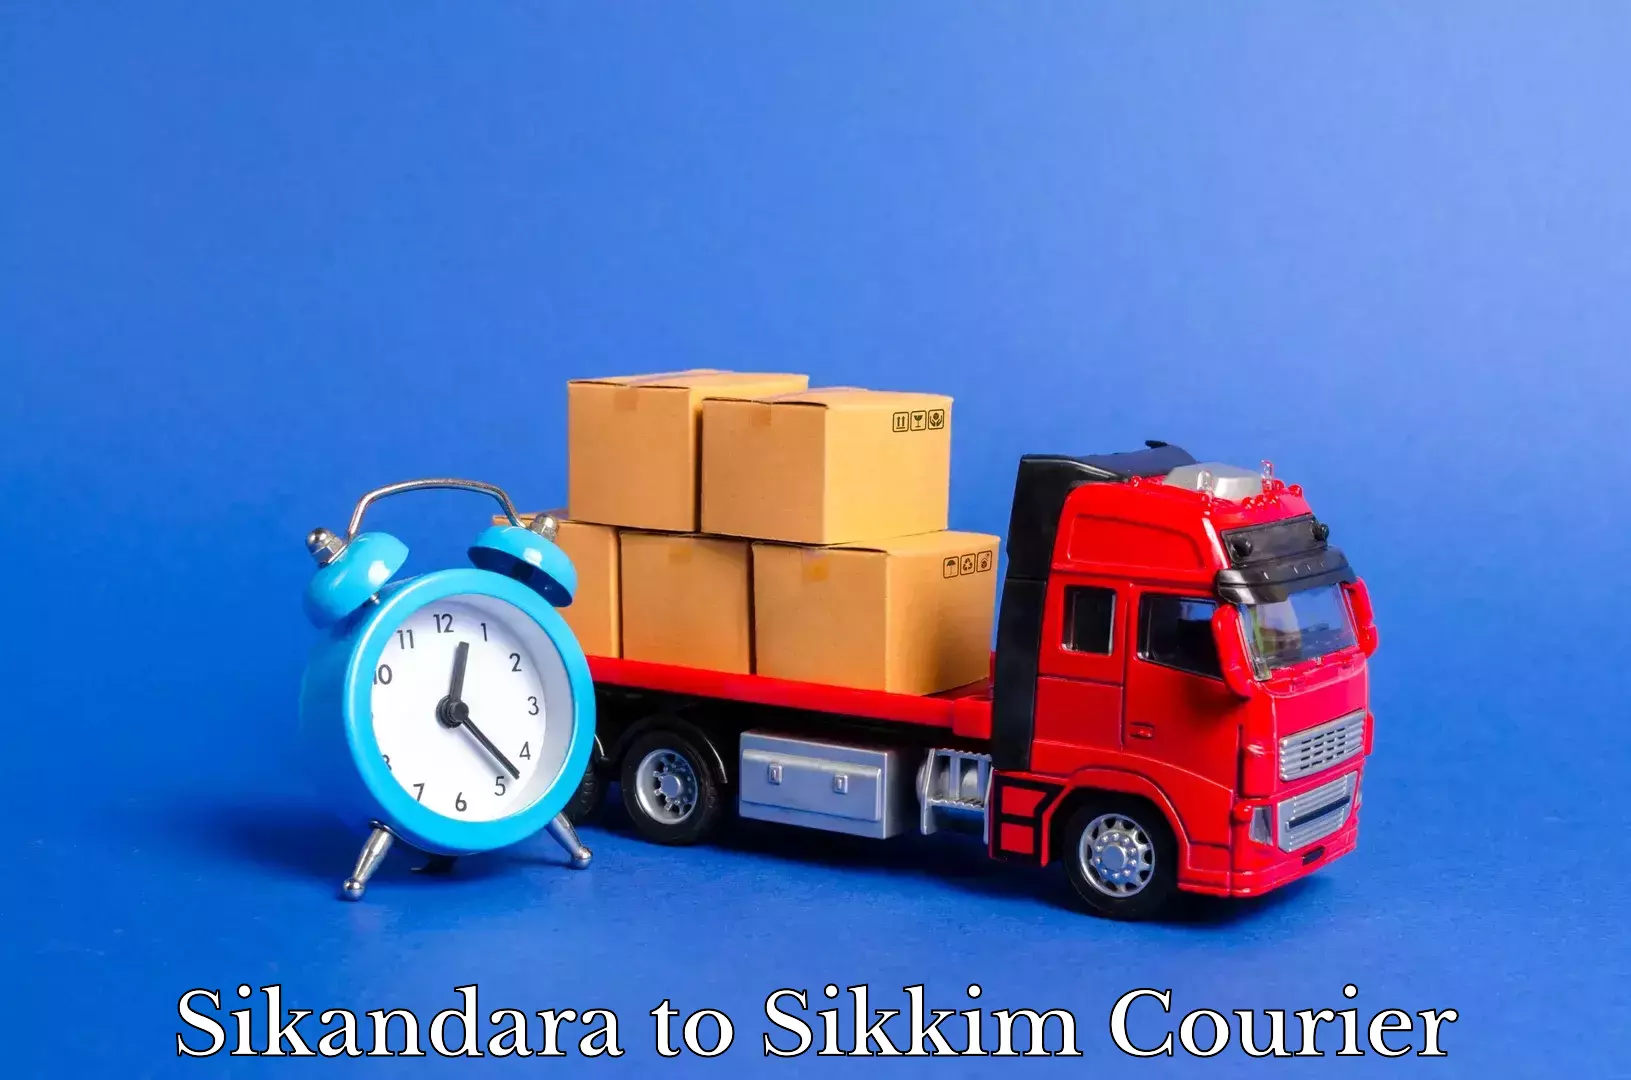 Specialized moving company in Sikandara to Pelling